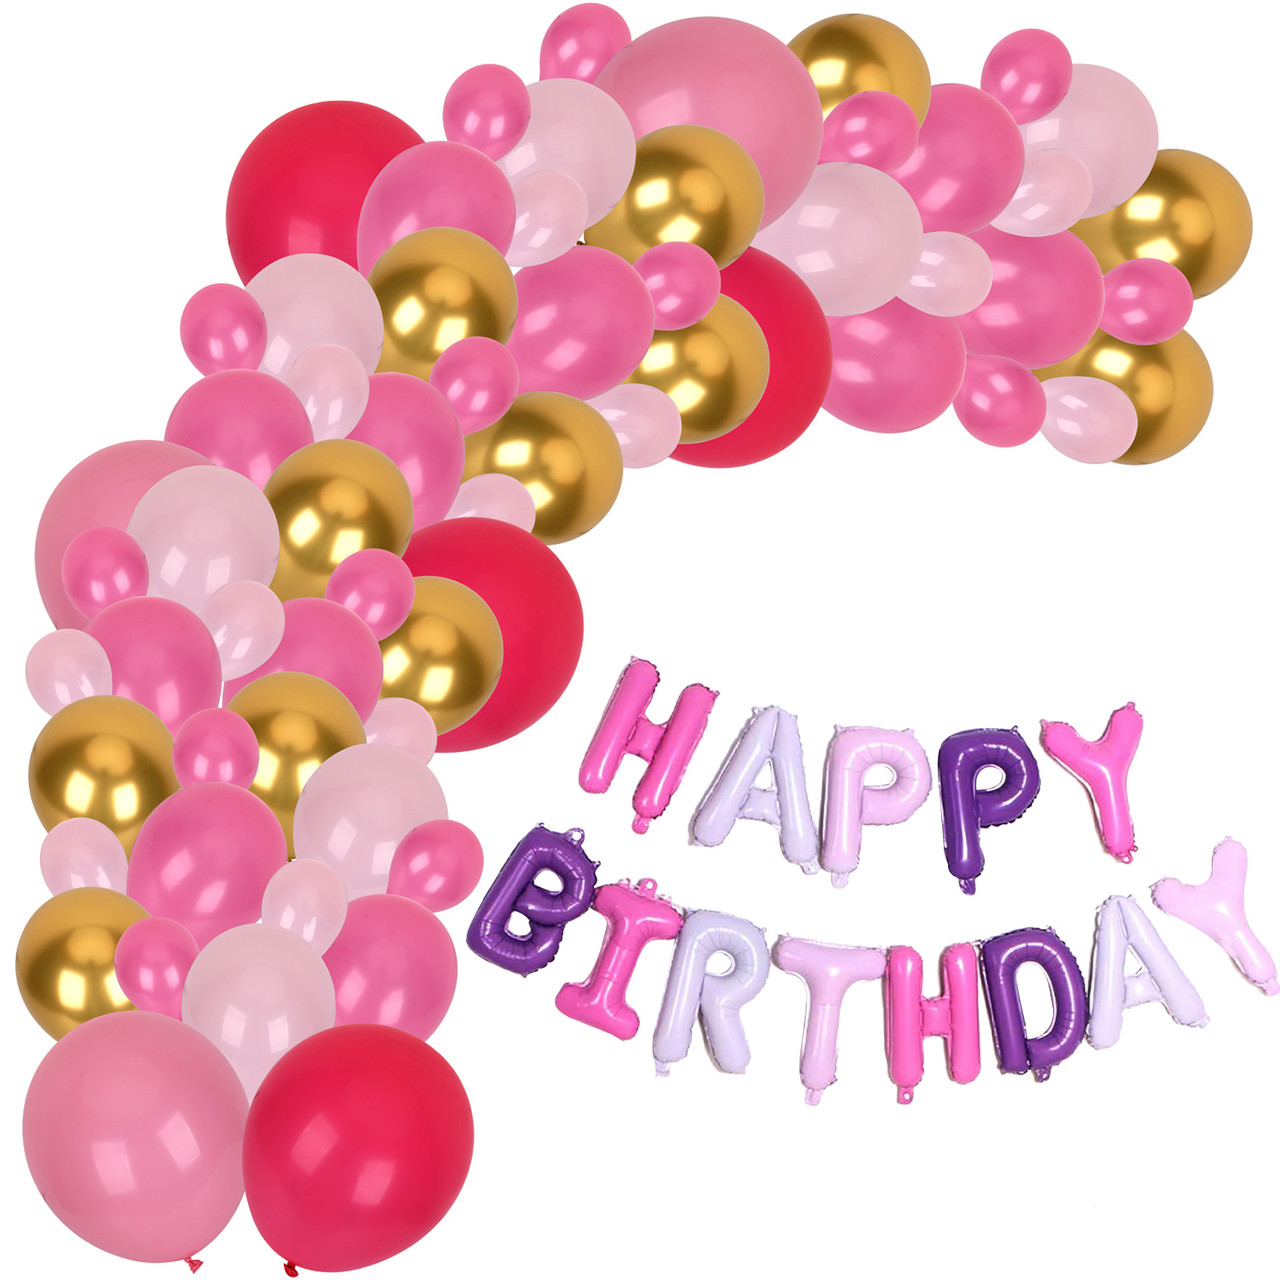 Pink Balloon Arch with Happy Birthday Foil Balloon Set - 98pcs